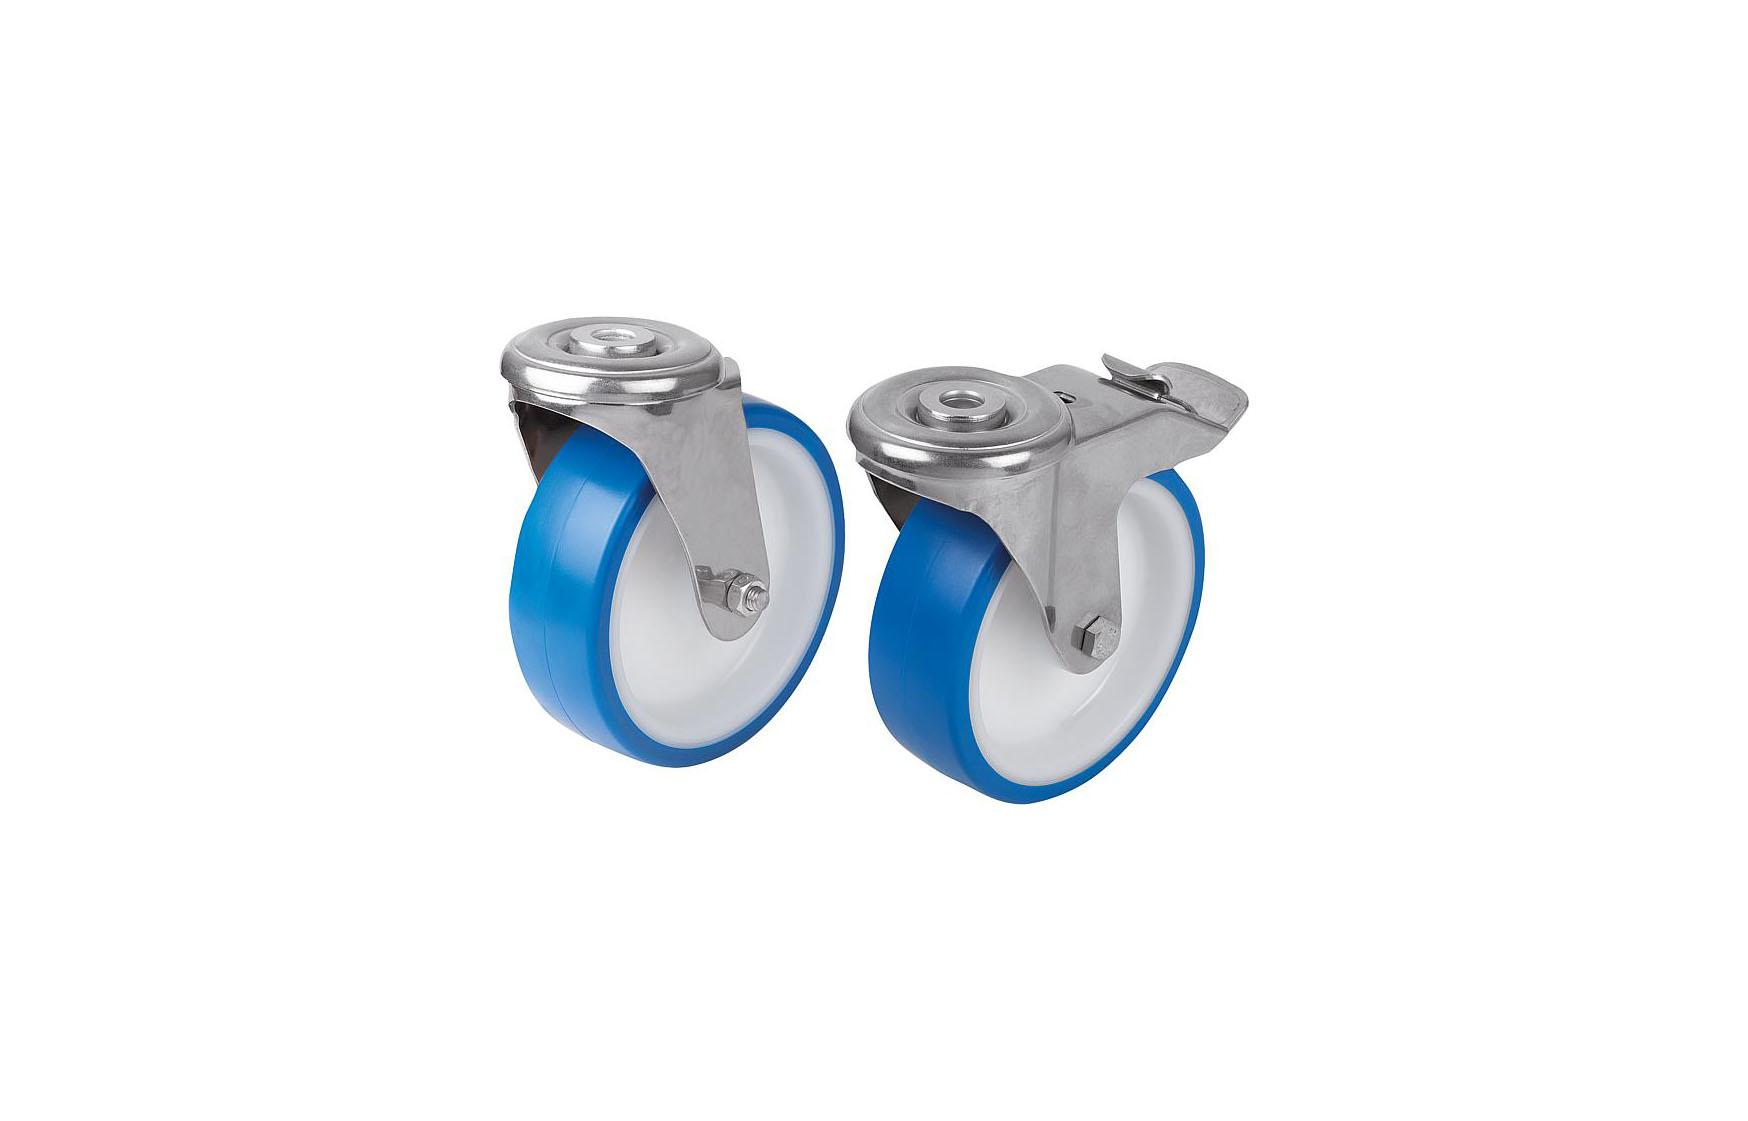 K1791_Swivel castors with bolt hole stainless steel, for sterile areas